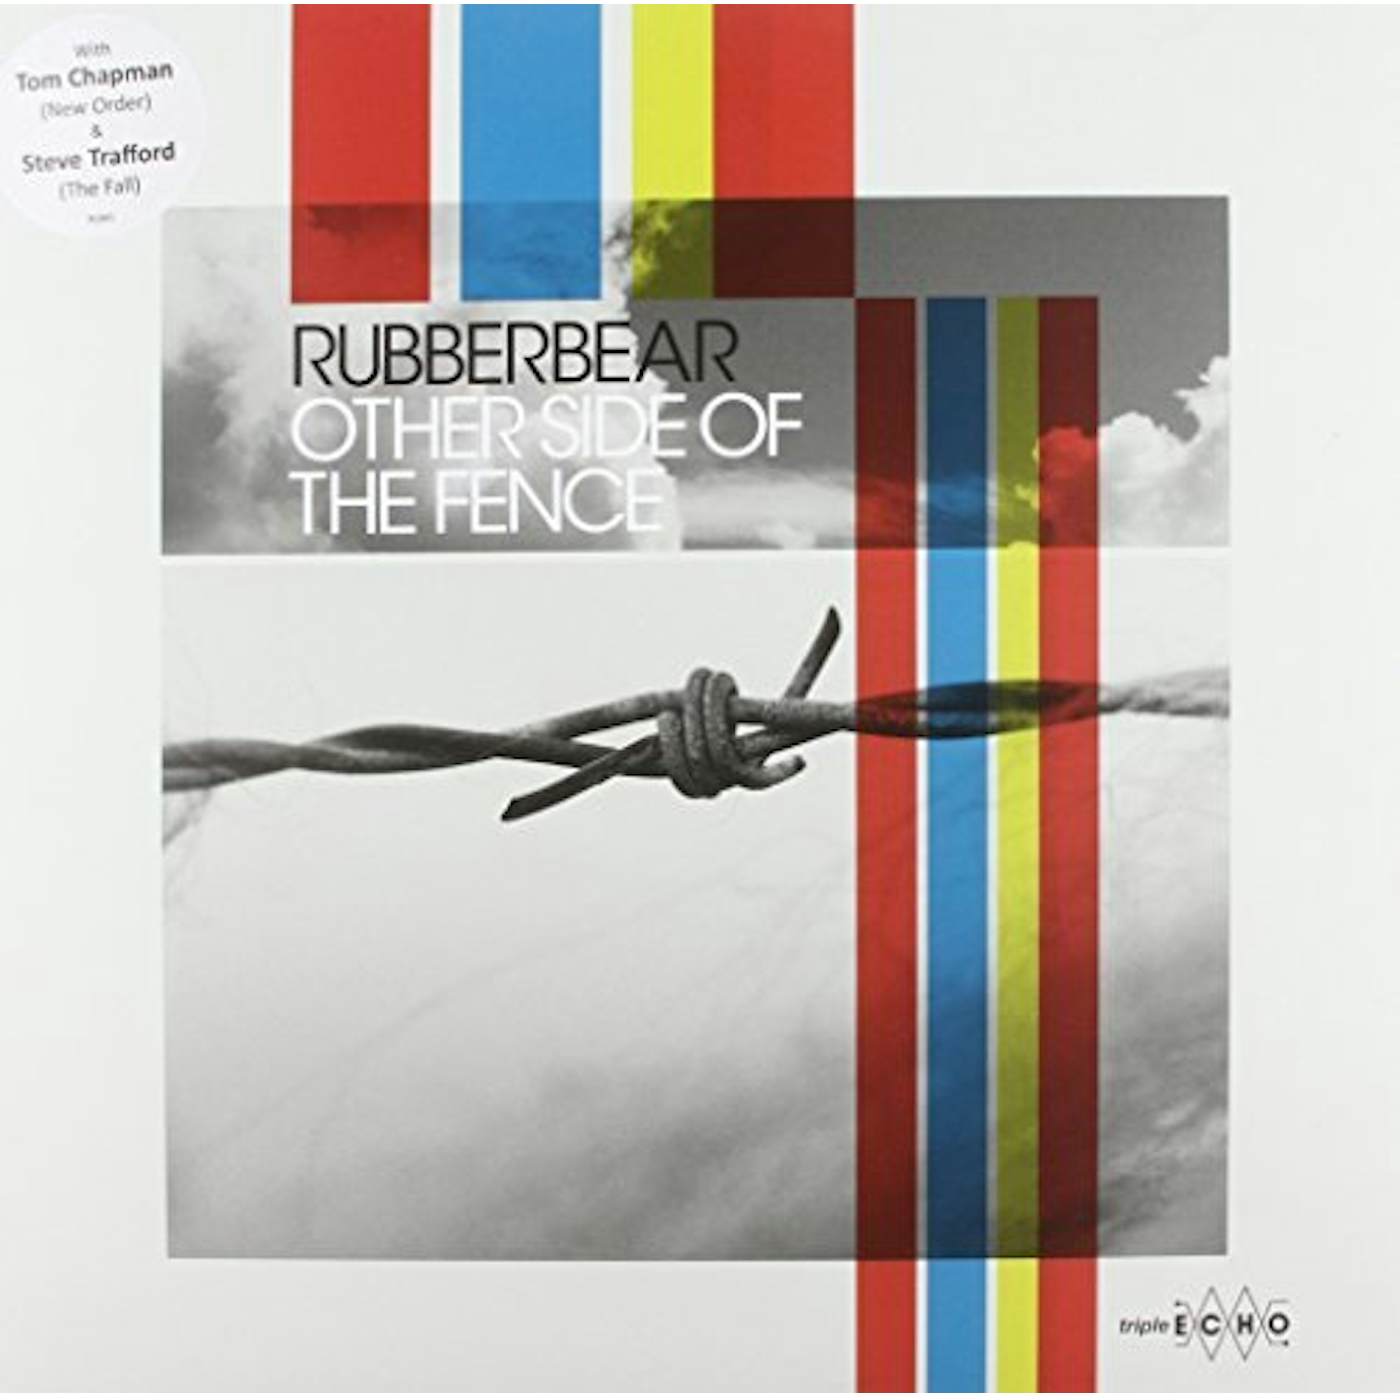 Rubberbear Other Side Of The Fence Vinyl Record